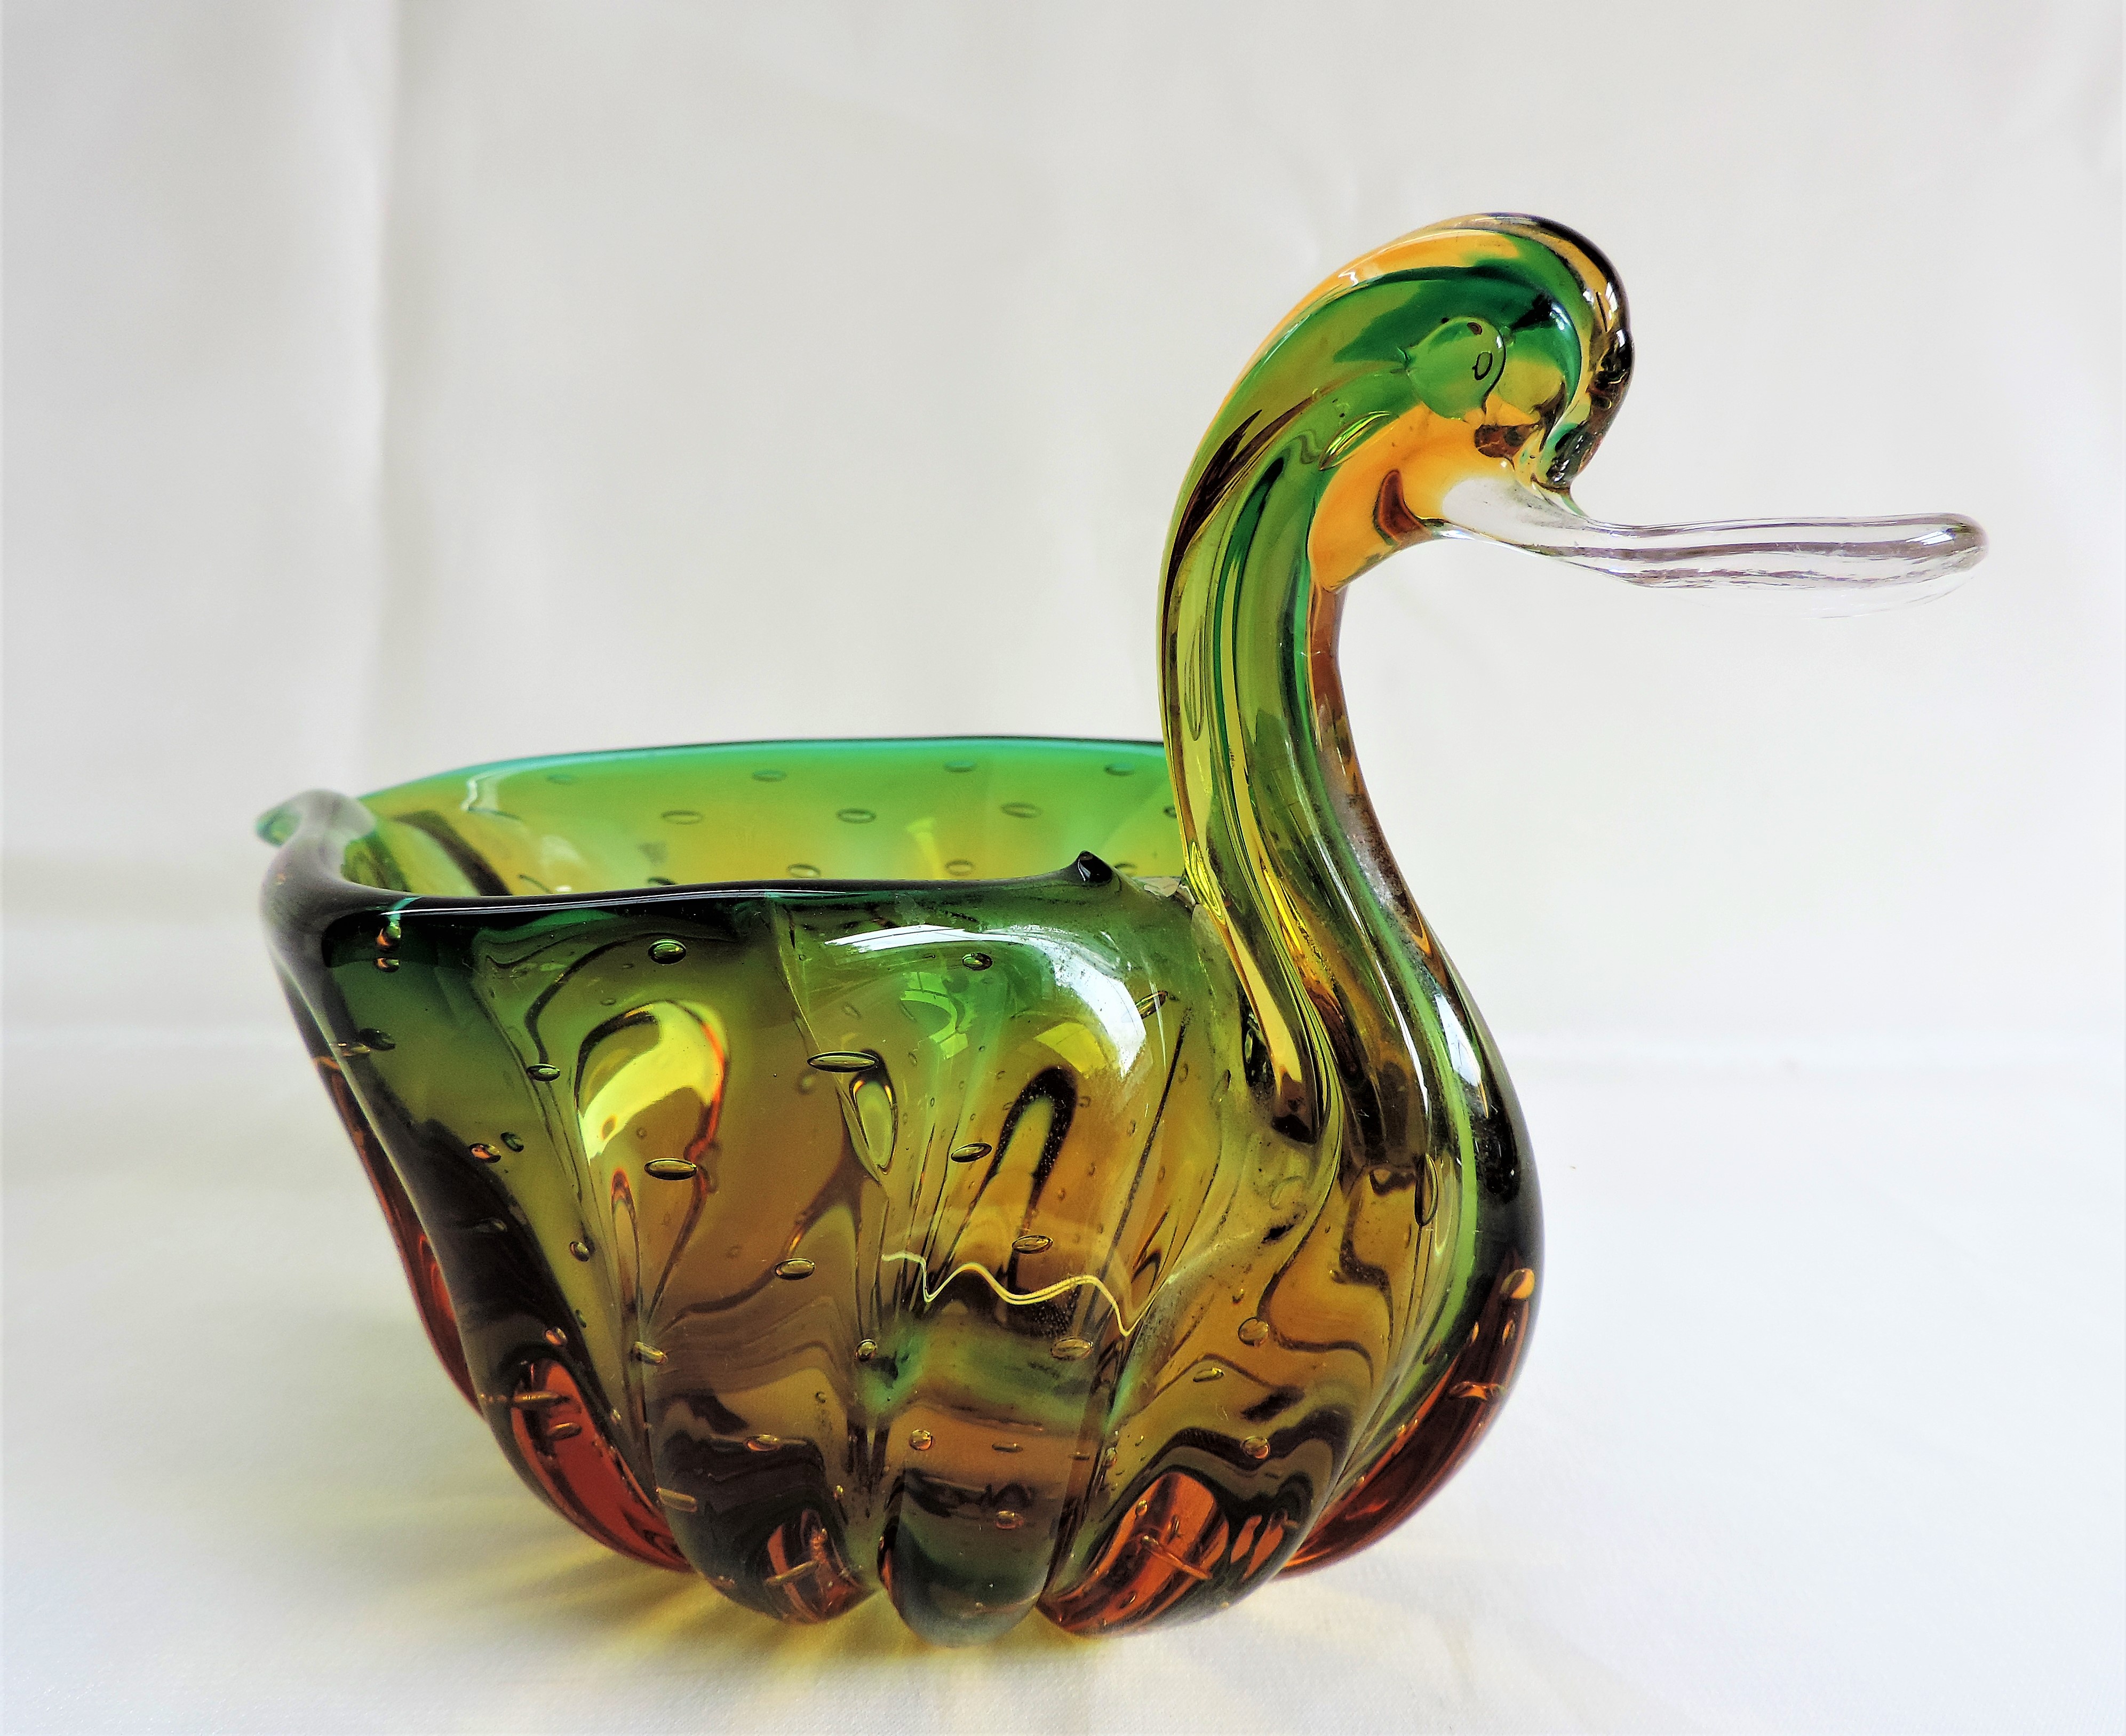 Vintage Murano Bubble Glass Bowl - Image 2 of 3